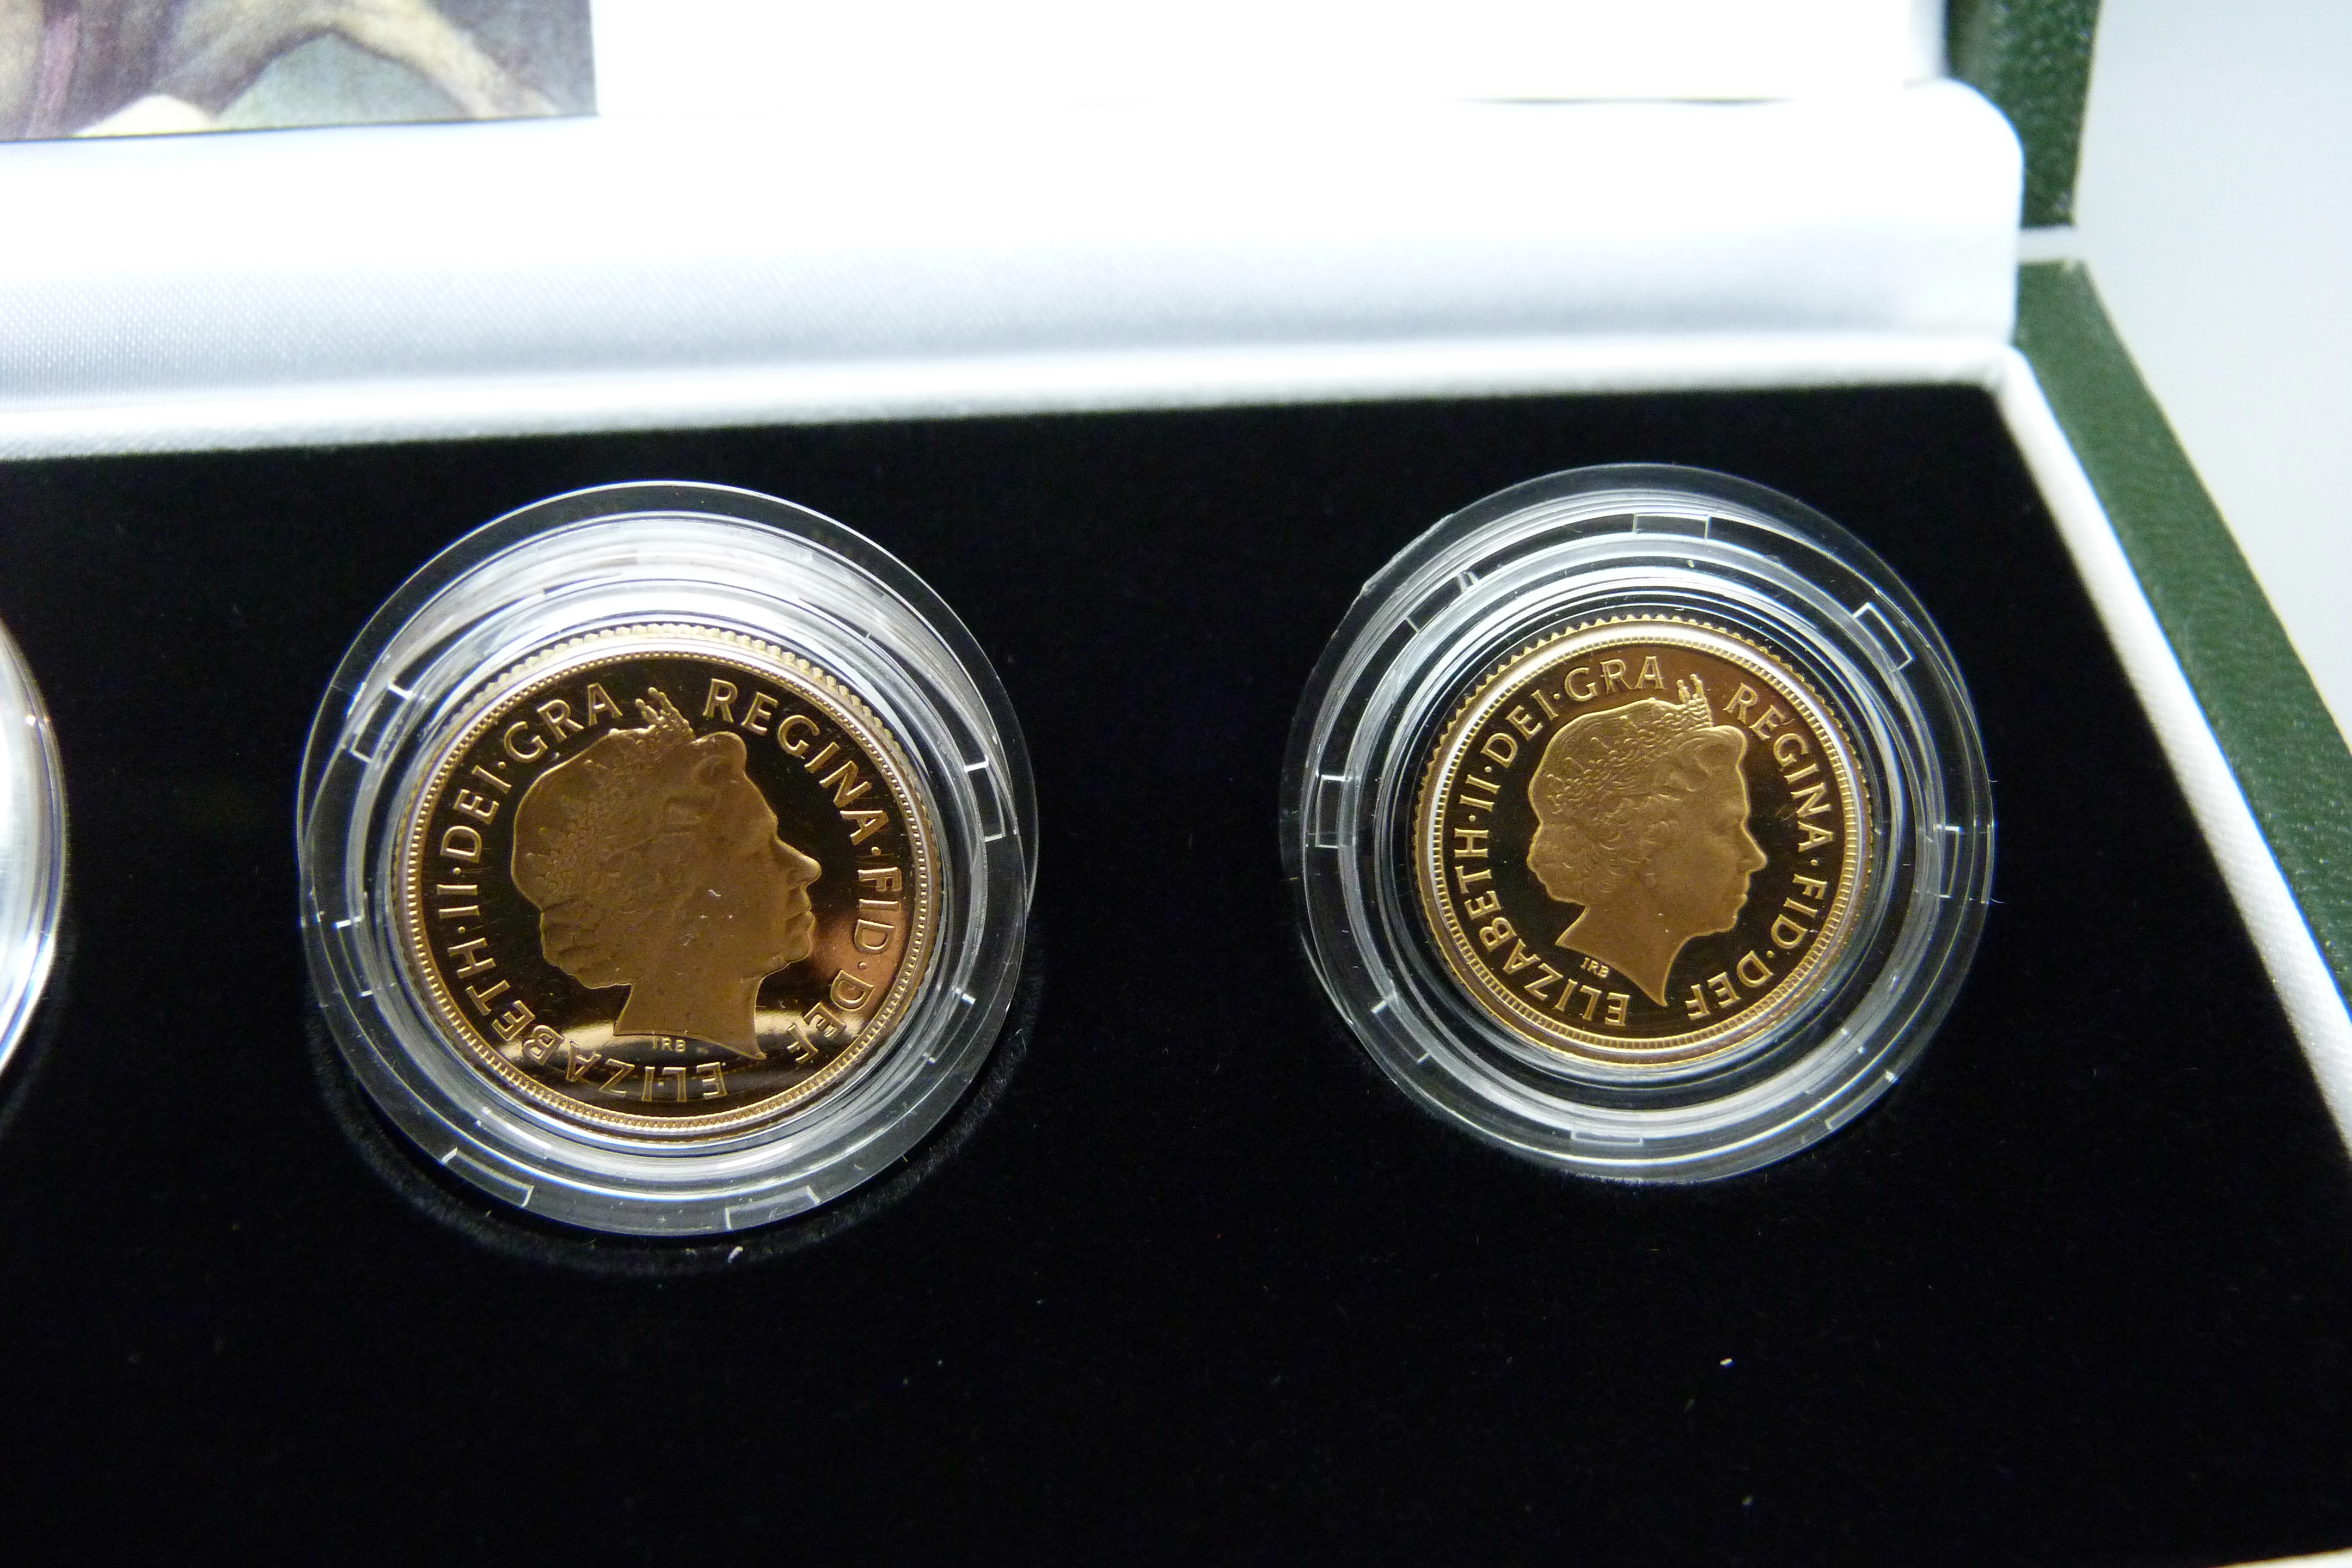 The Royal Mint 2007 UK gold proof four-coin sovereign collection, no. 968 - Image 6 of 7